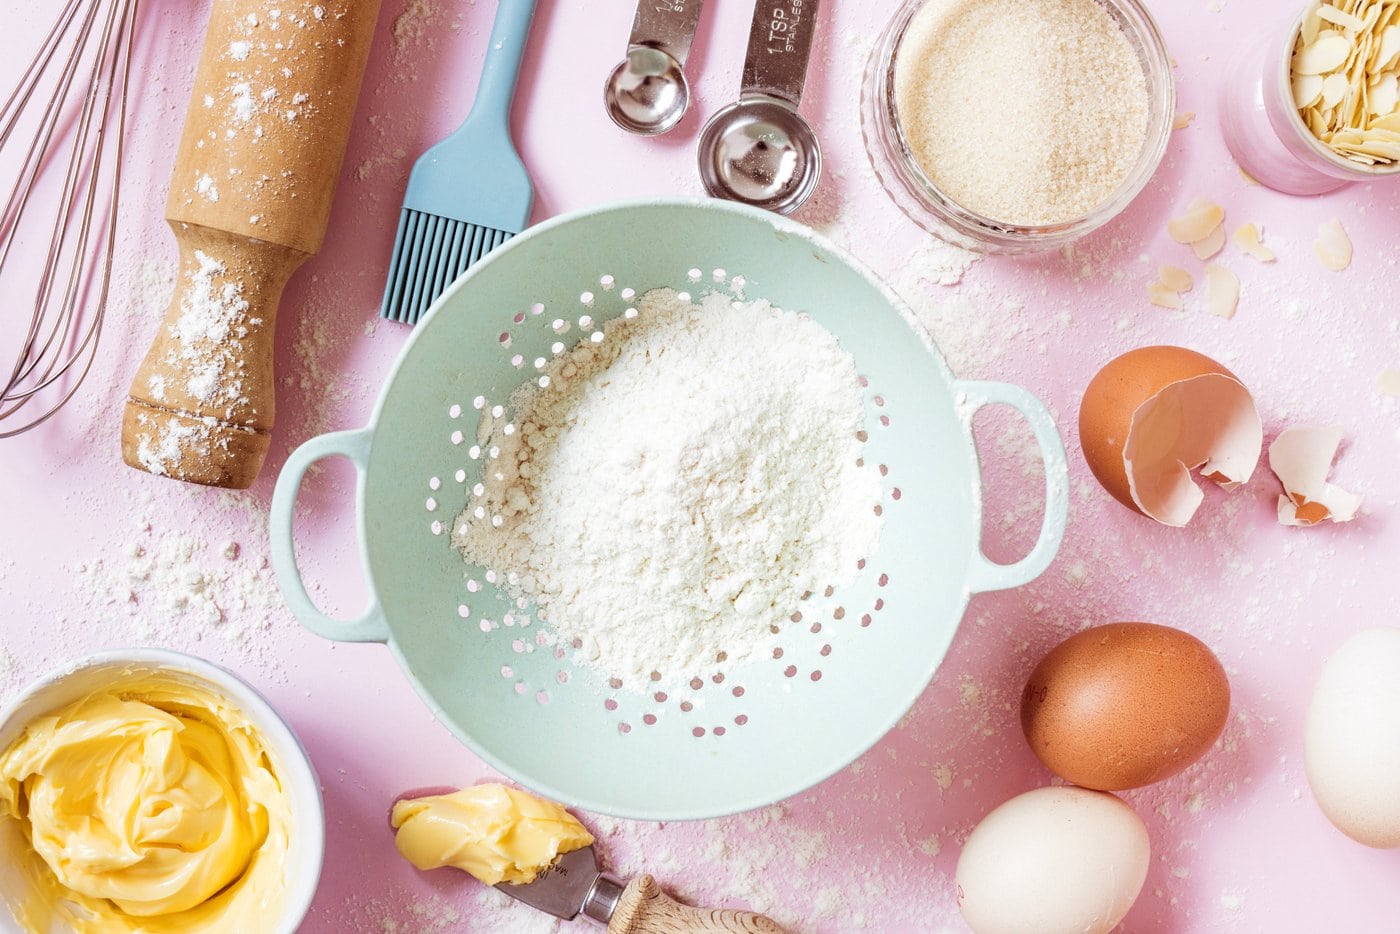 Baking ingredients and cup measures